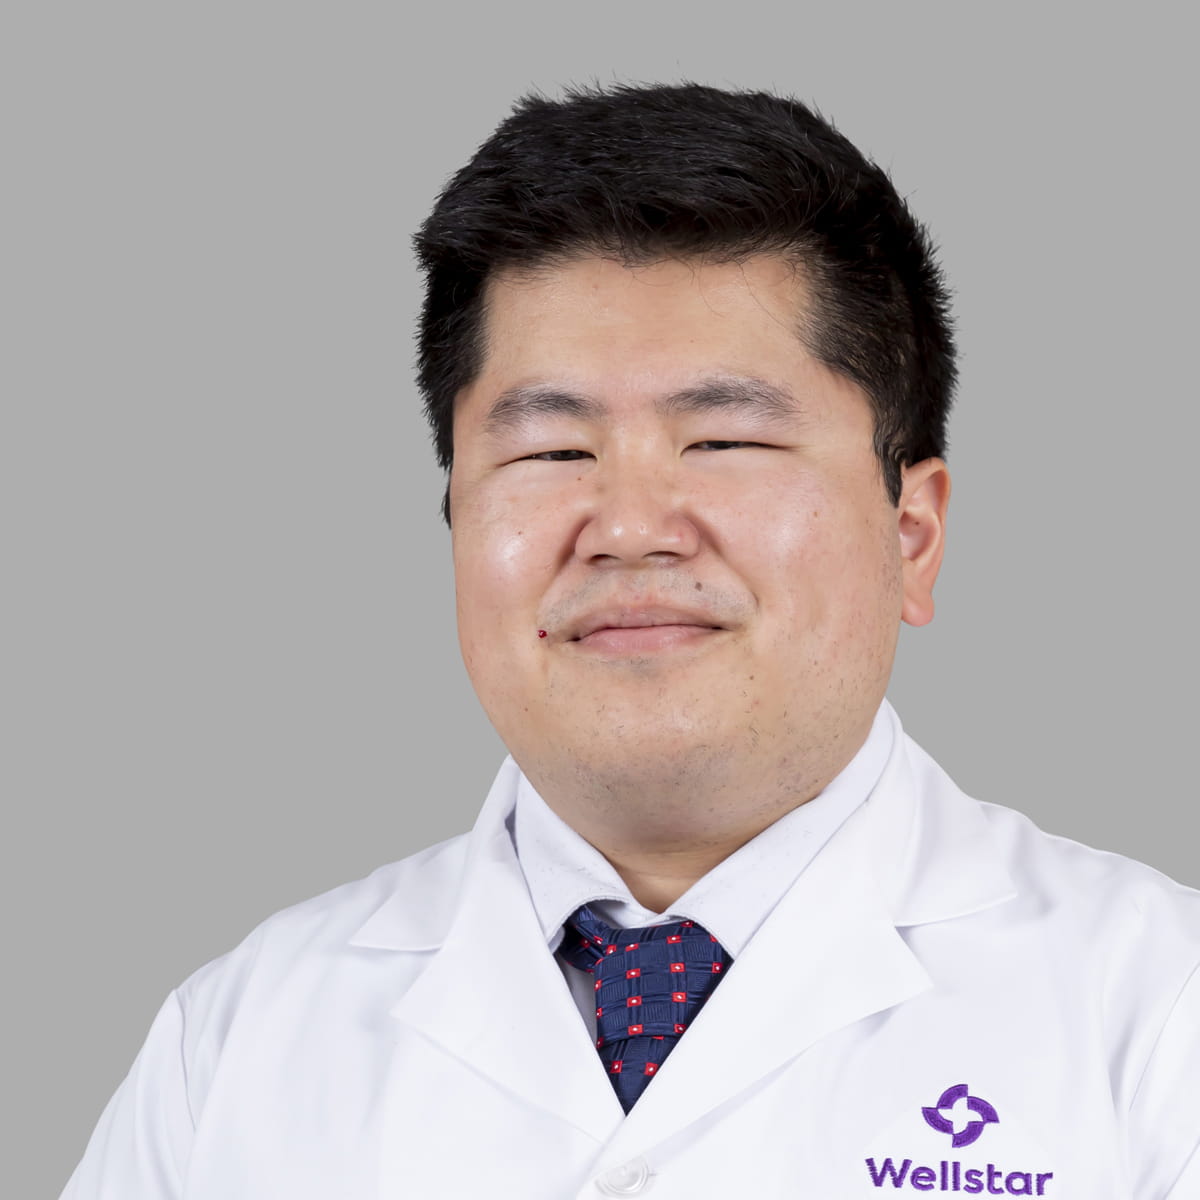 A friendly image of Christopher Chan MD